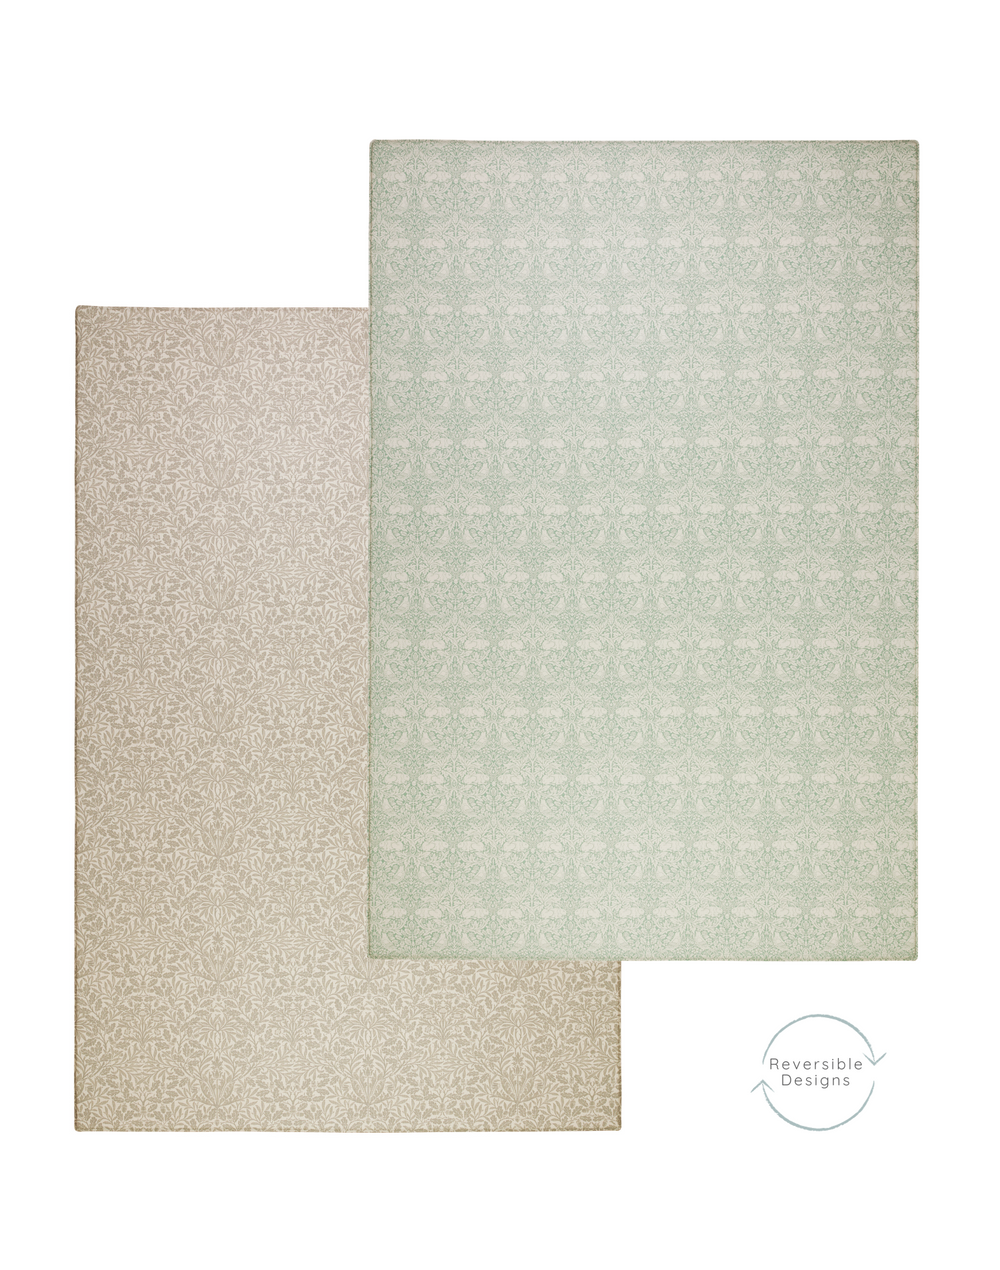 A double-sided play mat in soothing earthy tones